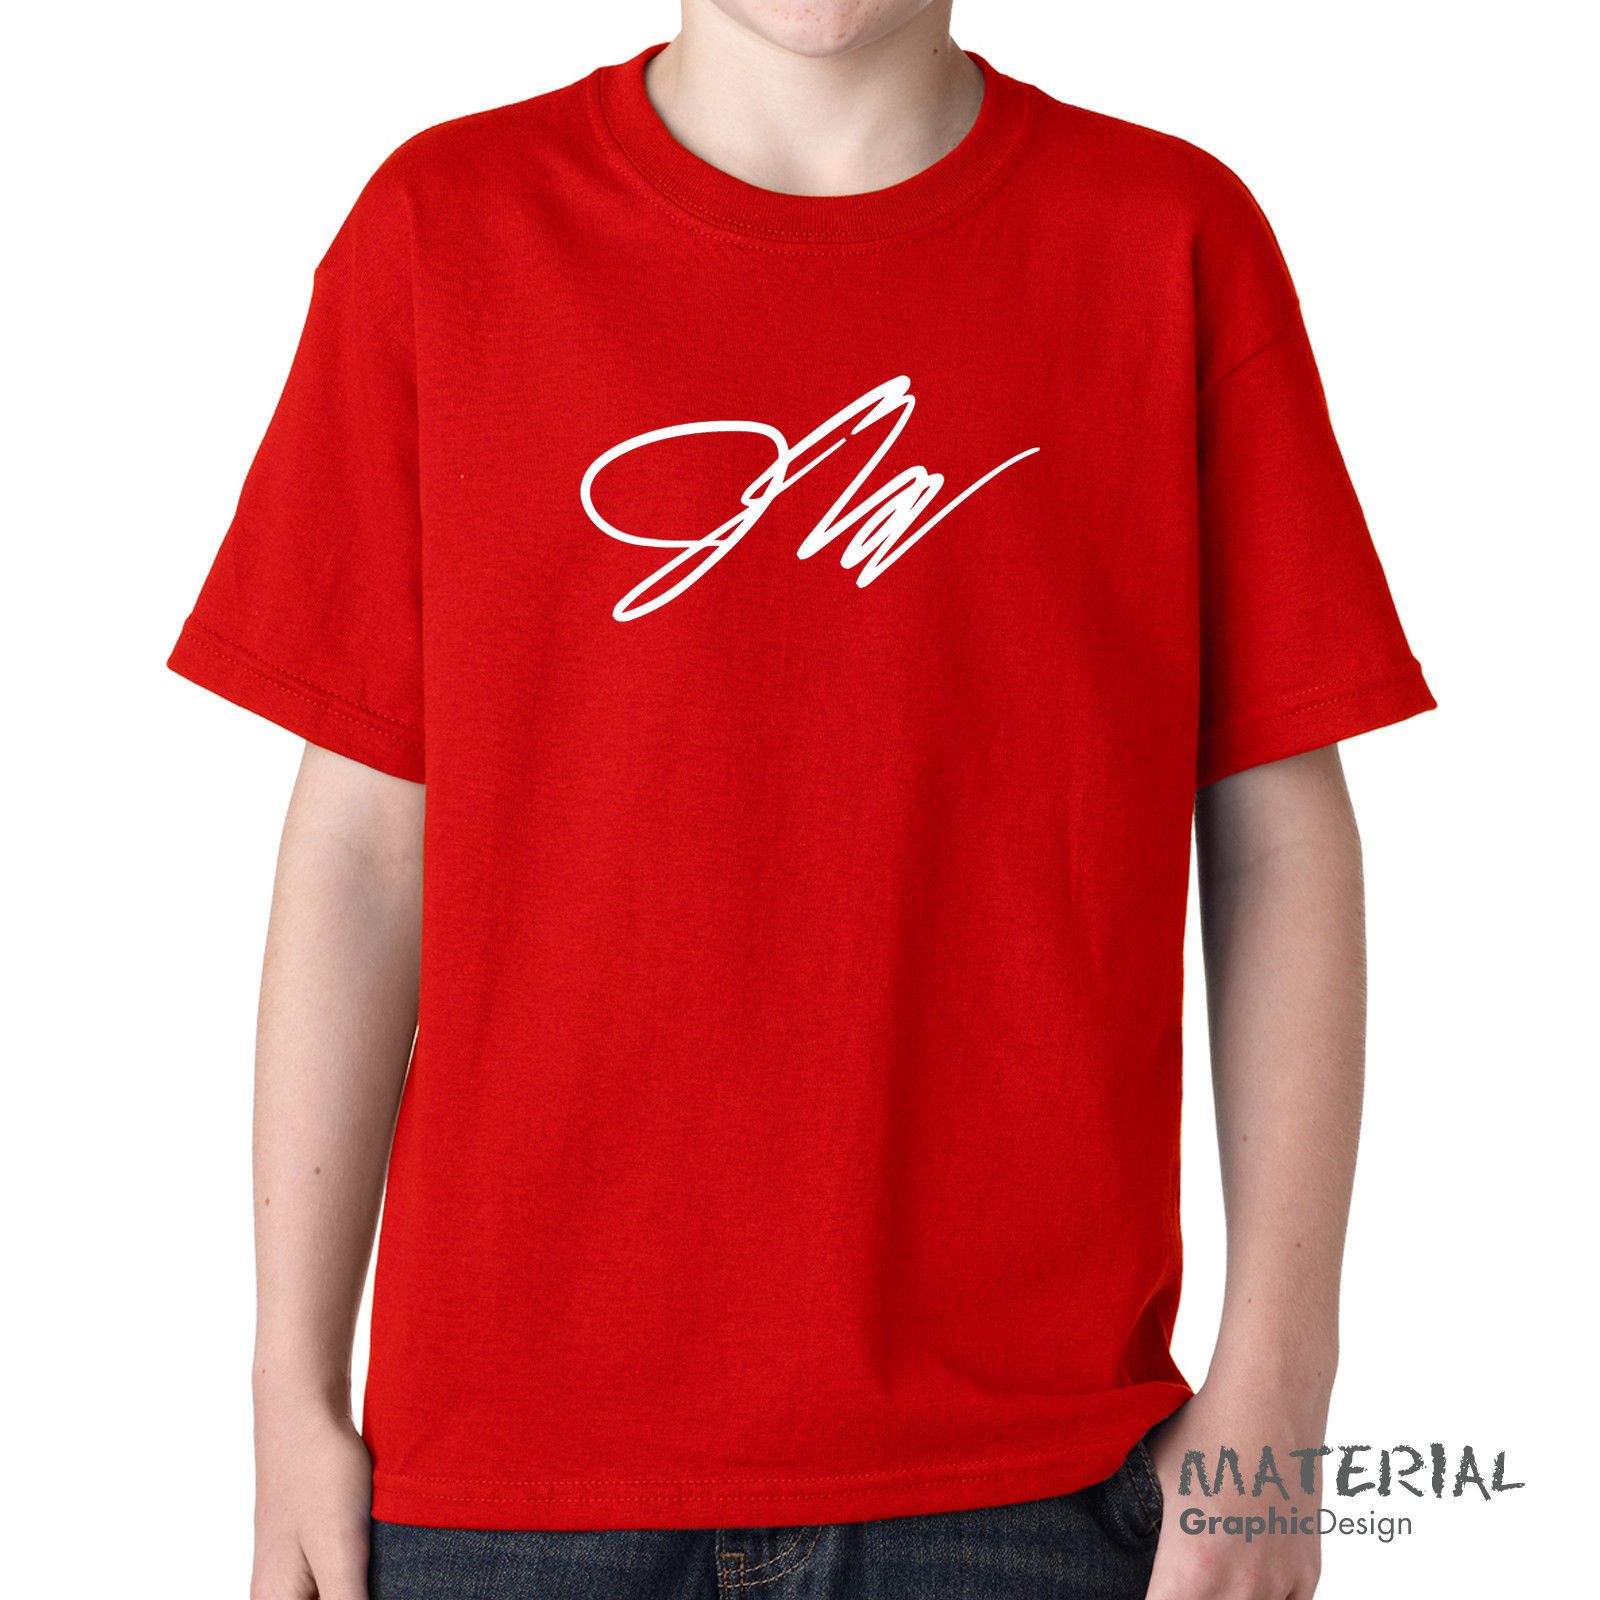 Jake Paul Signature Youth T Shirt Logan Every Day Bro Team 10 Logang Kids Brah Funny Cool Shirts Be Awesome T Shirt From Xsy13tshirt 12 05 Dhgate Com